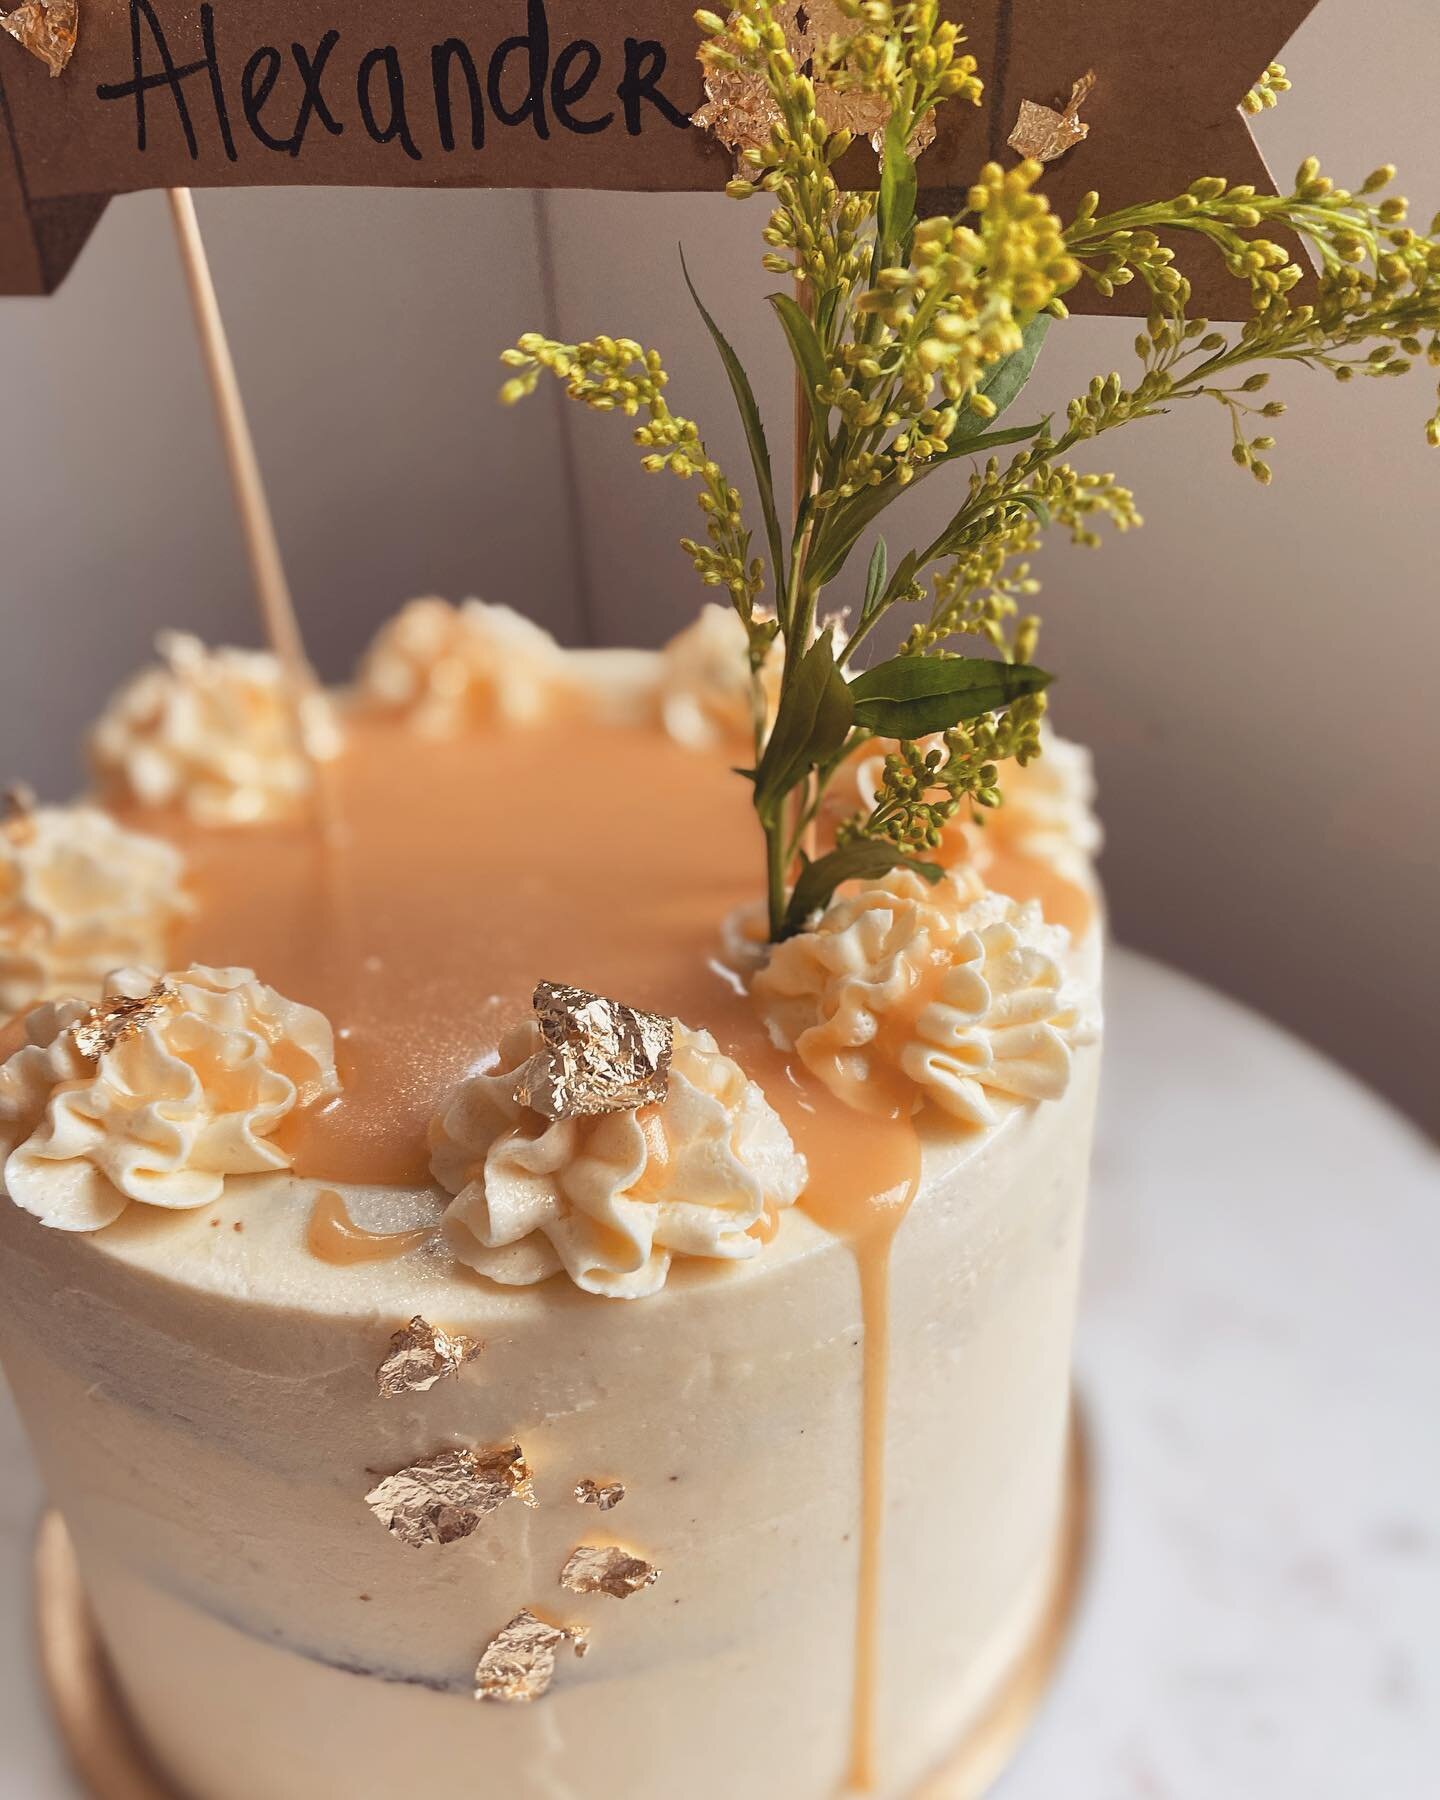 Caramel dripping down the sides, the cake was made out of vanilla cake layers and filled with salted caramel 🌼